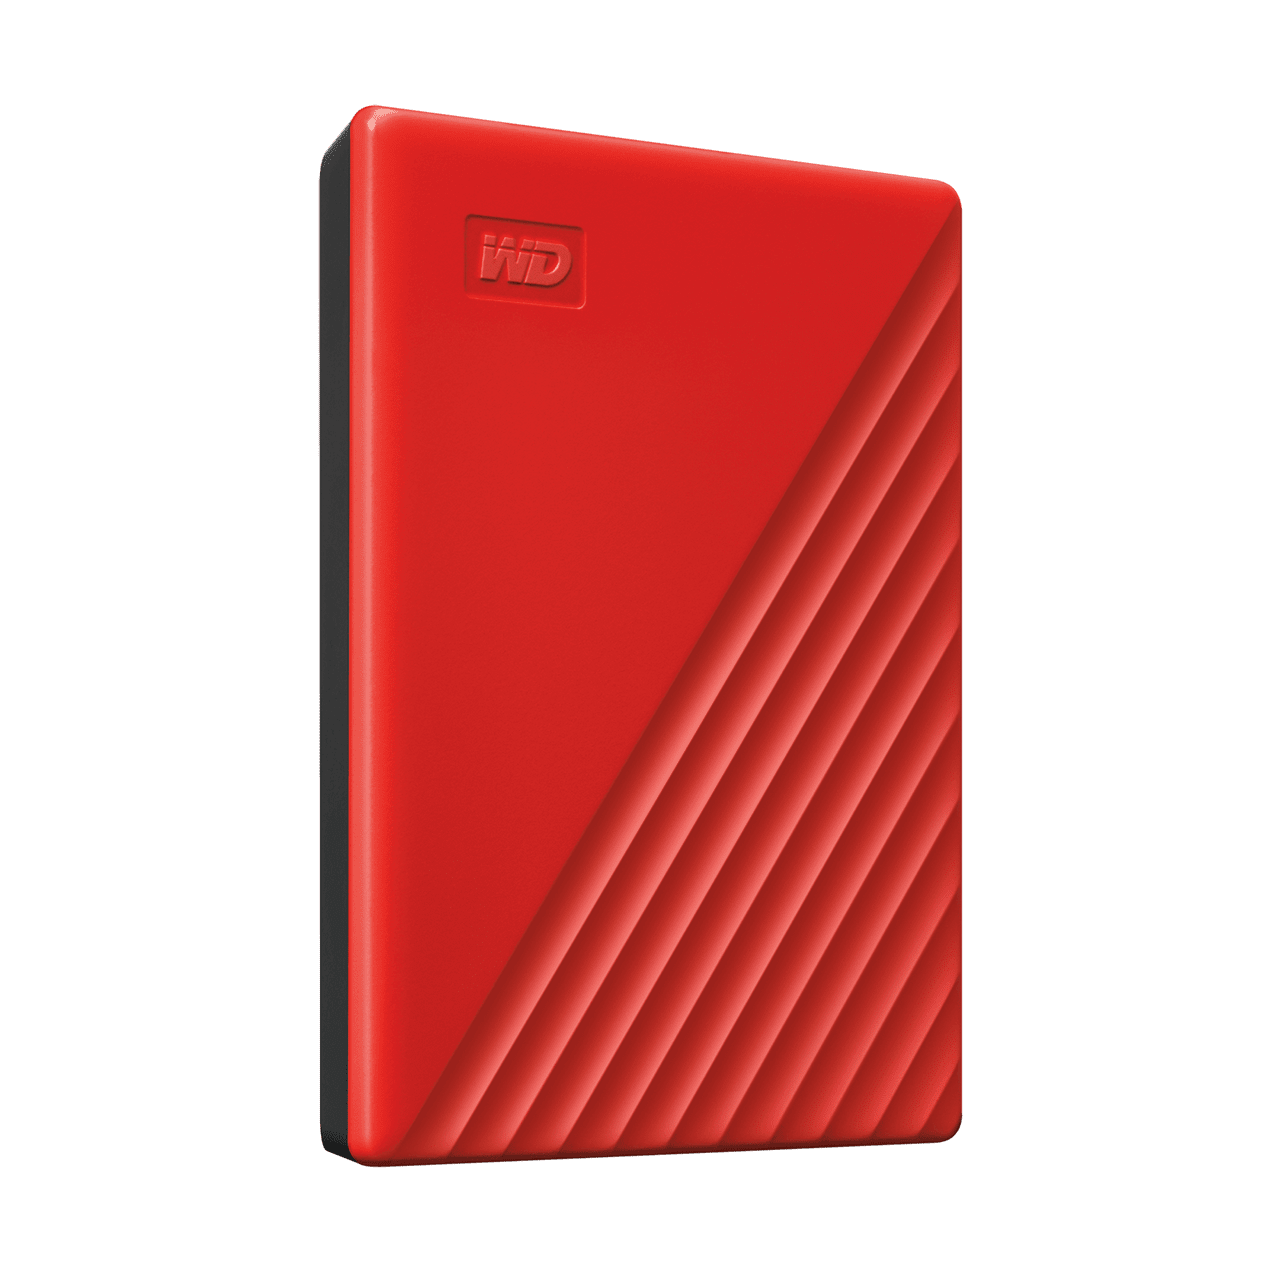 WD Western Digital My Passport 1TB (Red) Slim Portable External Hard Disk USB 3.0 With WD Backup Software & Password Protection